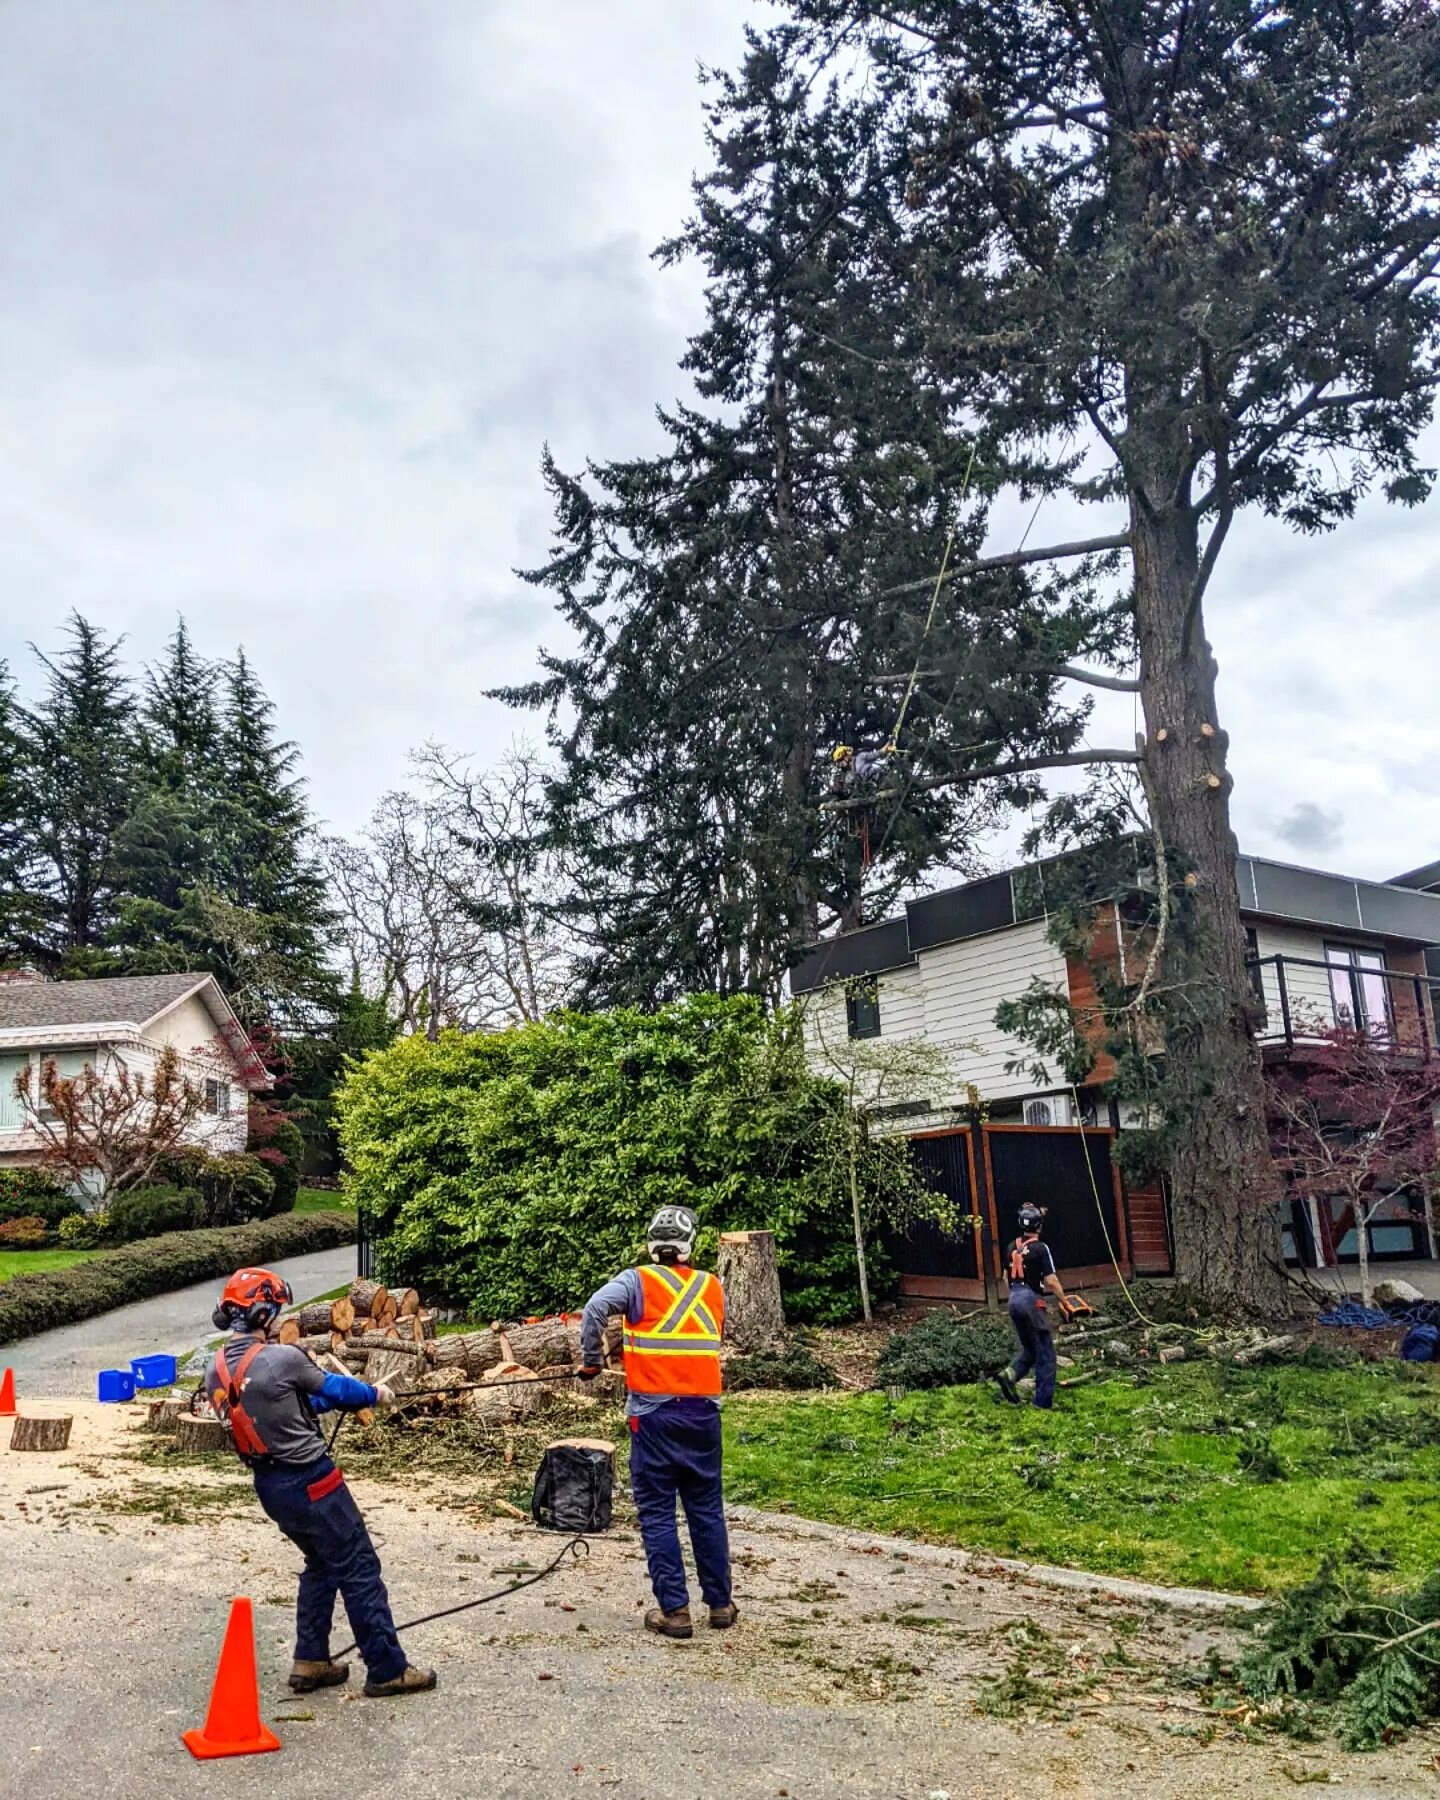 Boys did a stellar job today removing a 90 foot Dougy and canopy lift on larger Doug over house and glass porch.
#doneright #treelife #treeclimber #treesurgeon #treework #team #teamwork #yyj